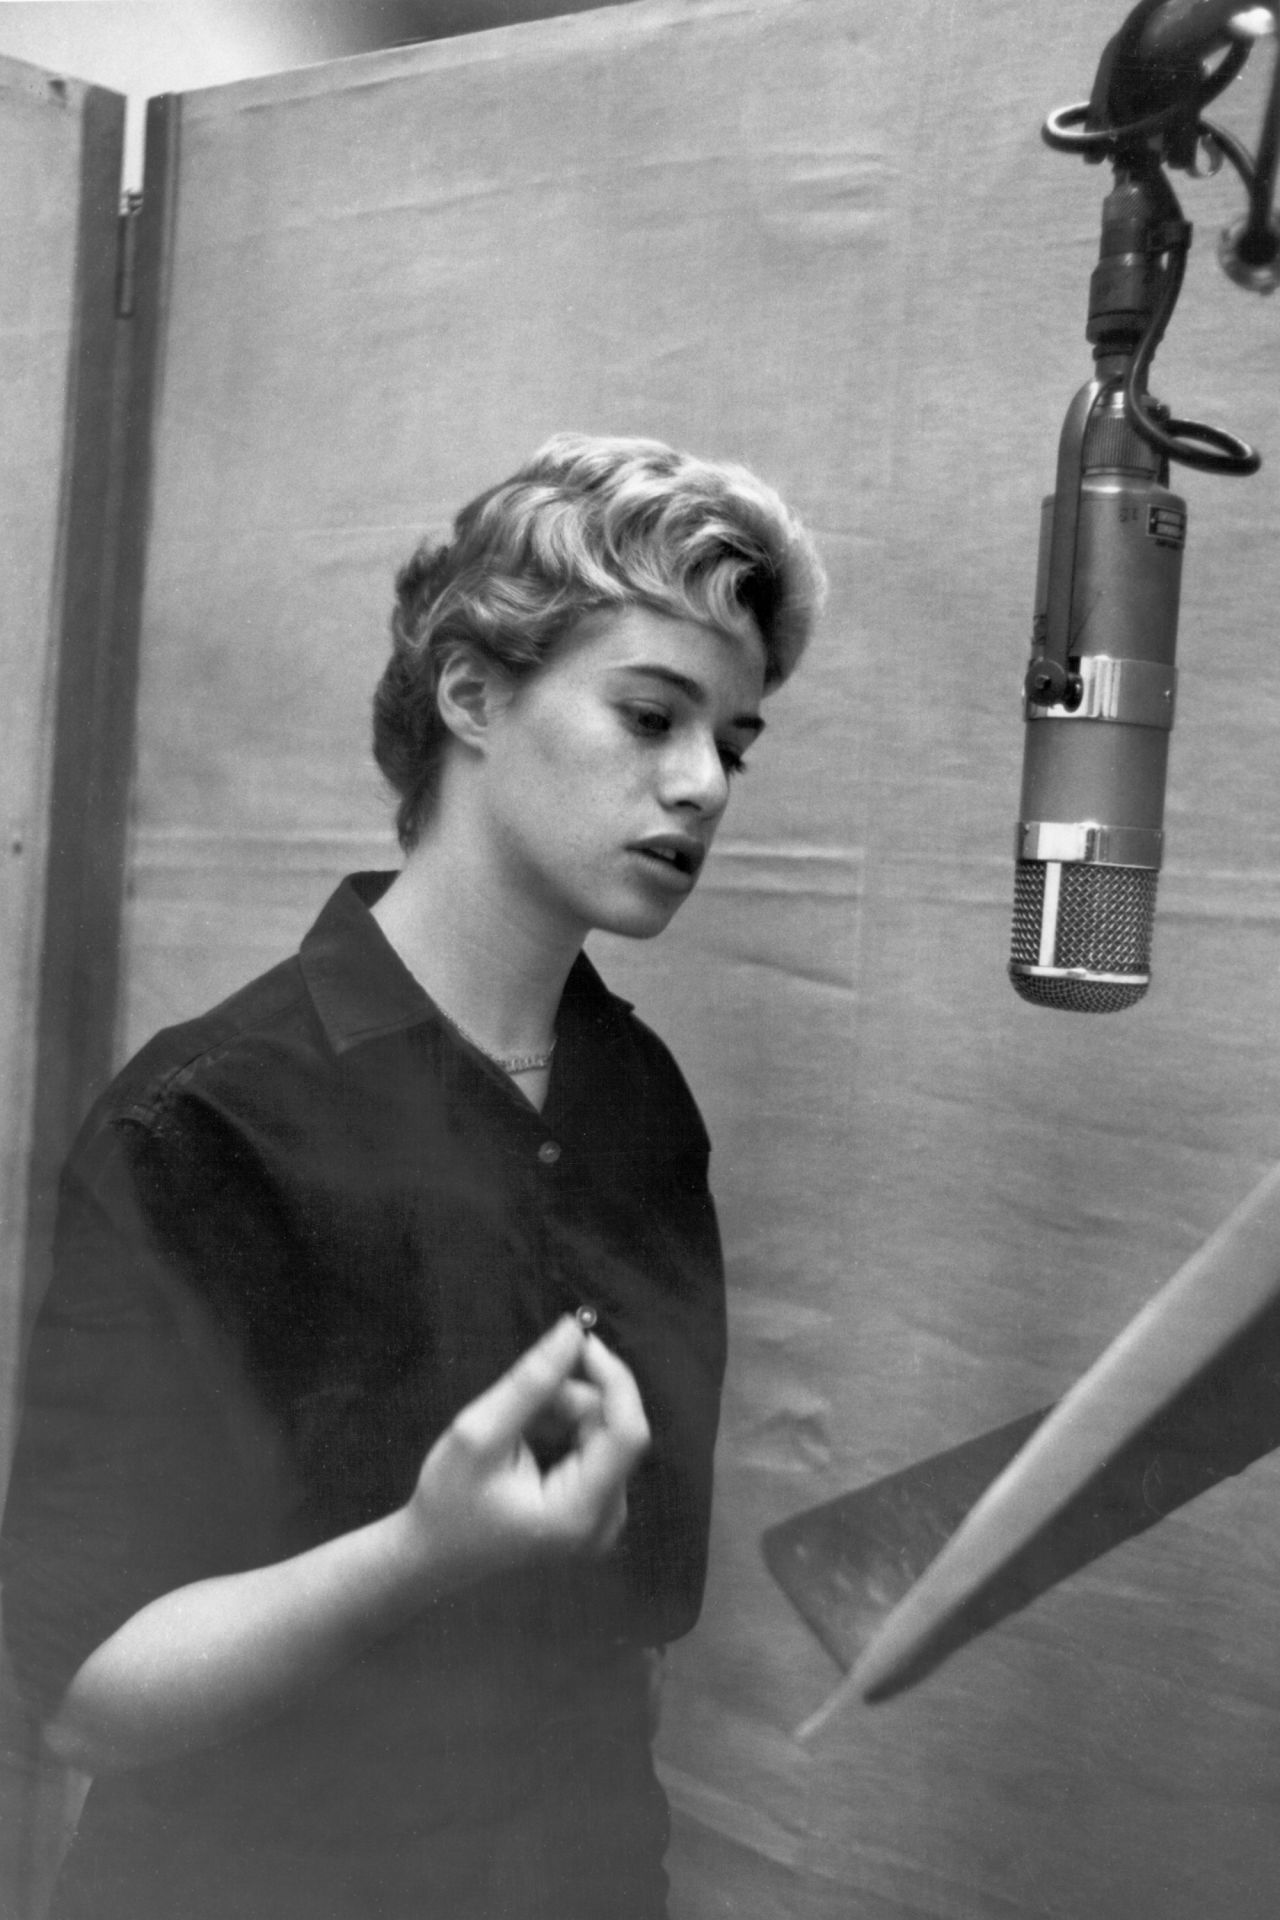 King tried her luck with various recording studios while attending Queens College in New York. She wrote her first No. 1 hit, <a href="https://www.caroleking.com/bio" target="_blank" target="_blank">"Will You Love Me Tomorrow,"</a> with then-husband Gerry Goffin when she was just 17 years old. <br />